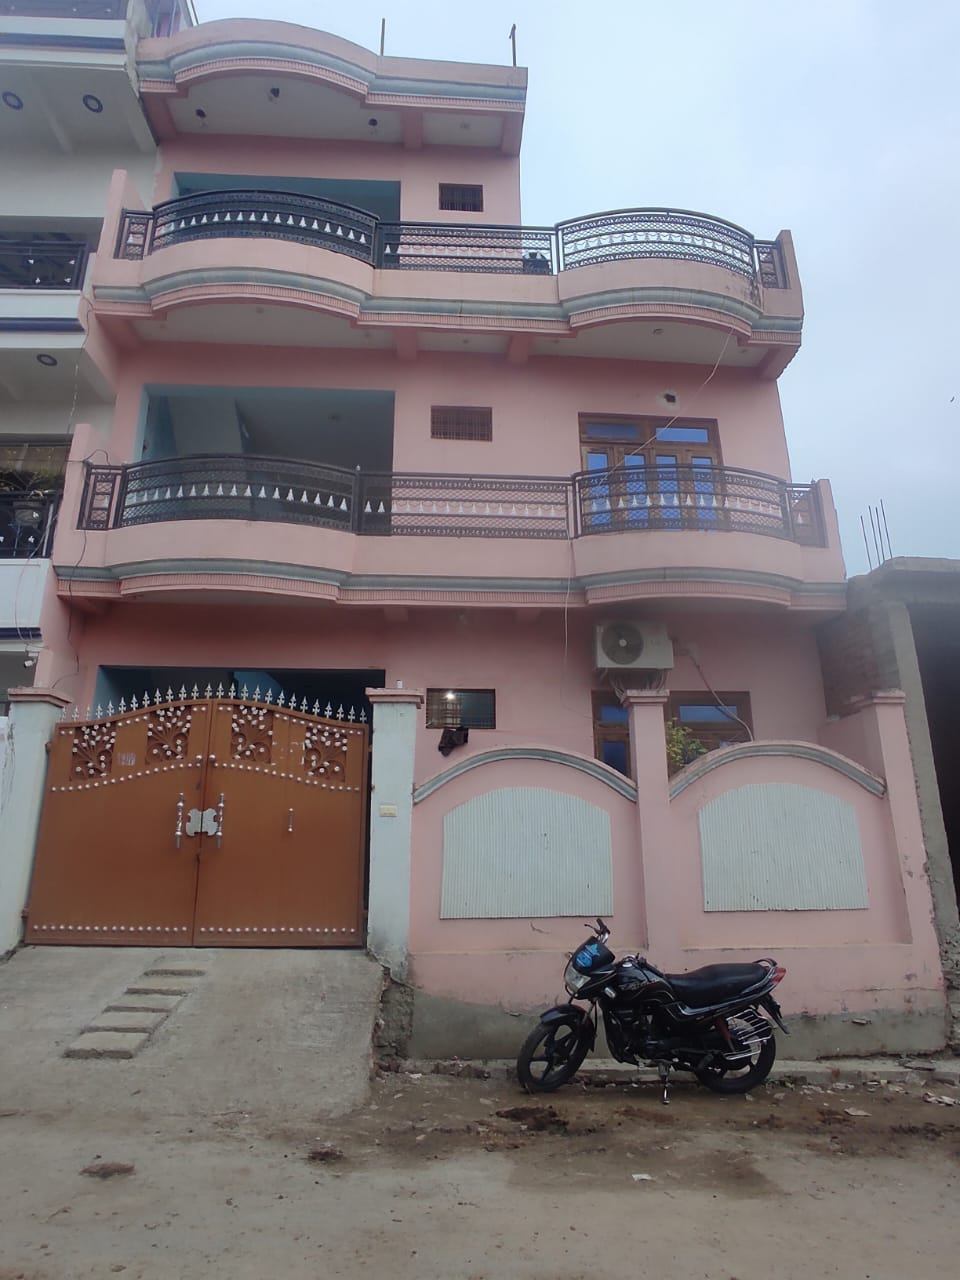 5+ Bed/ 2 Bath Sell House/ Bungalow/ Villa; 30 sq. ft. carpet area; 30 sq. ft. lot for sale @Kandhipur nyaay Nagar